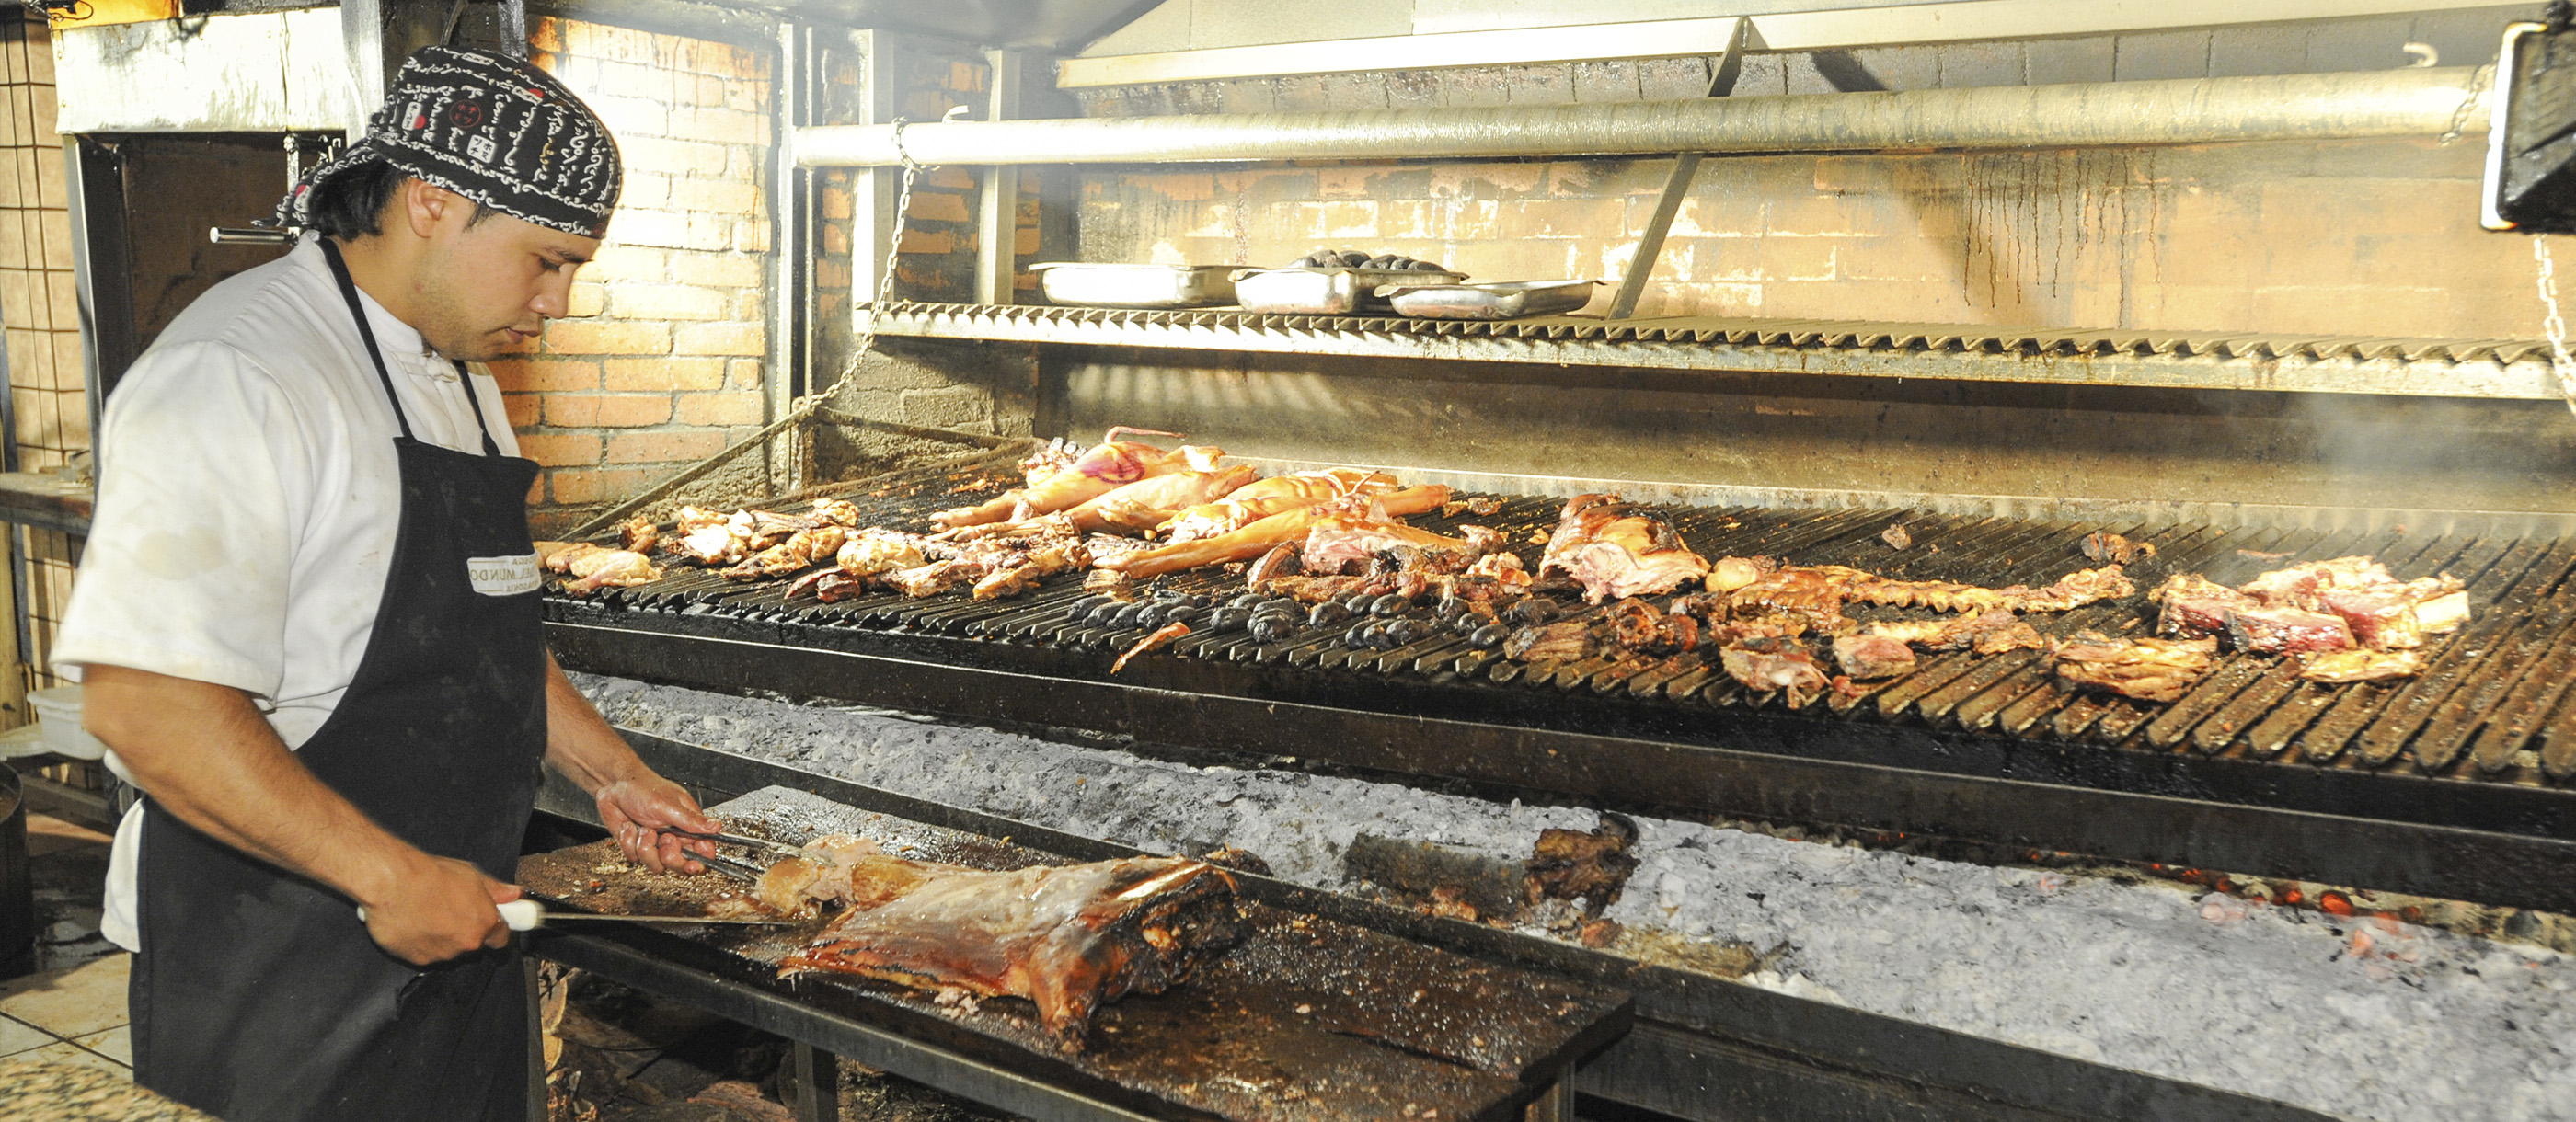 Parrilla  Traditional Barbecue From Argentina